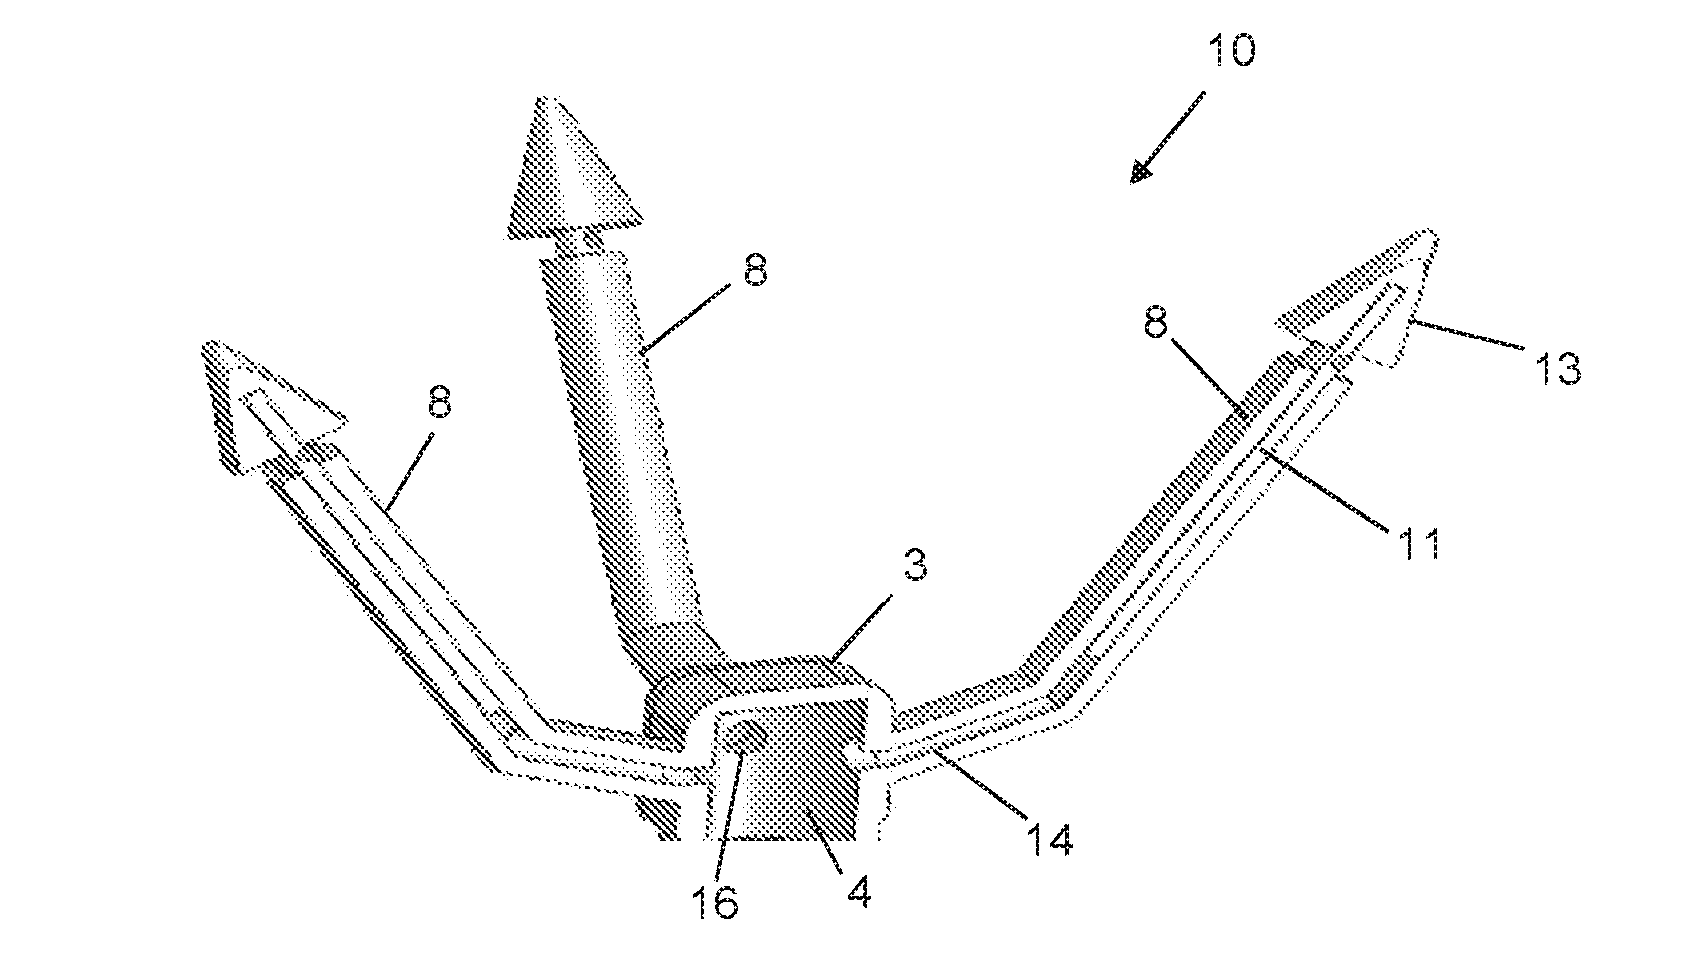 Apparatus and method for rapid deployment of a parachute